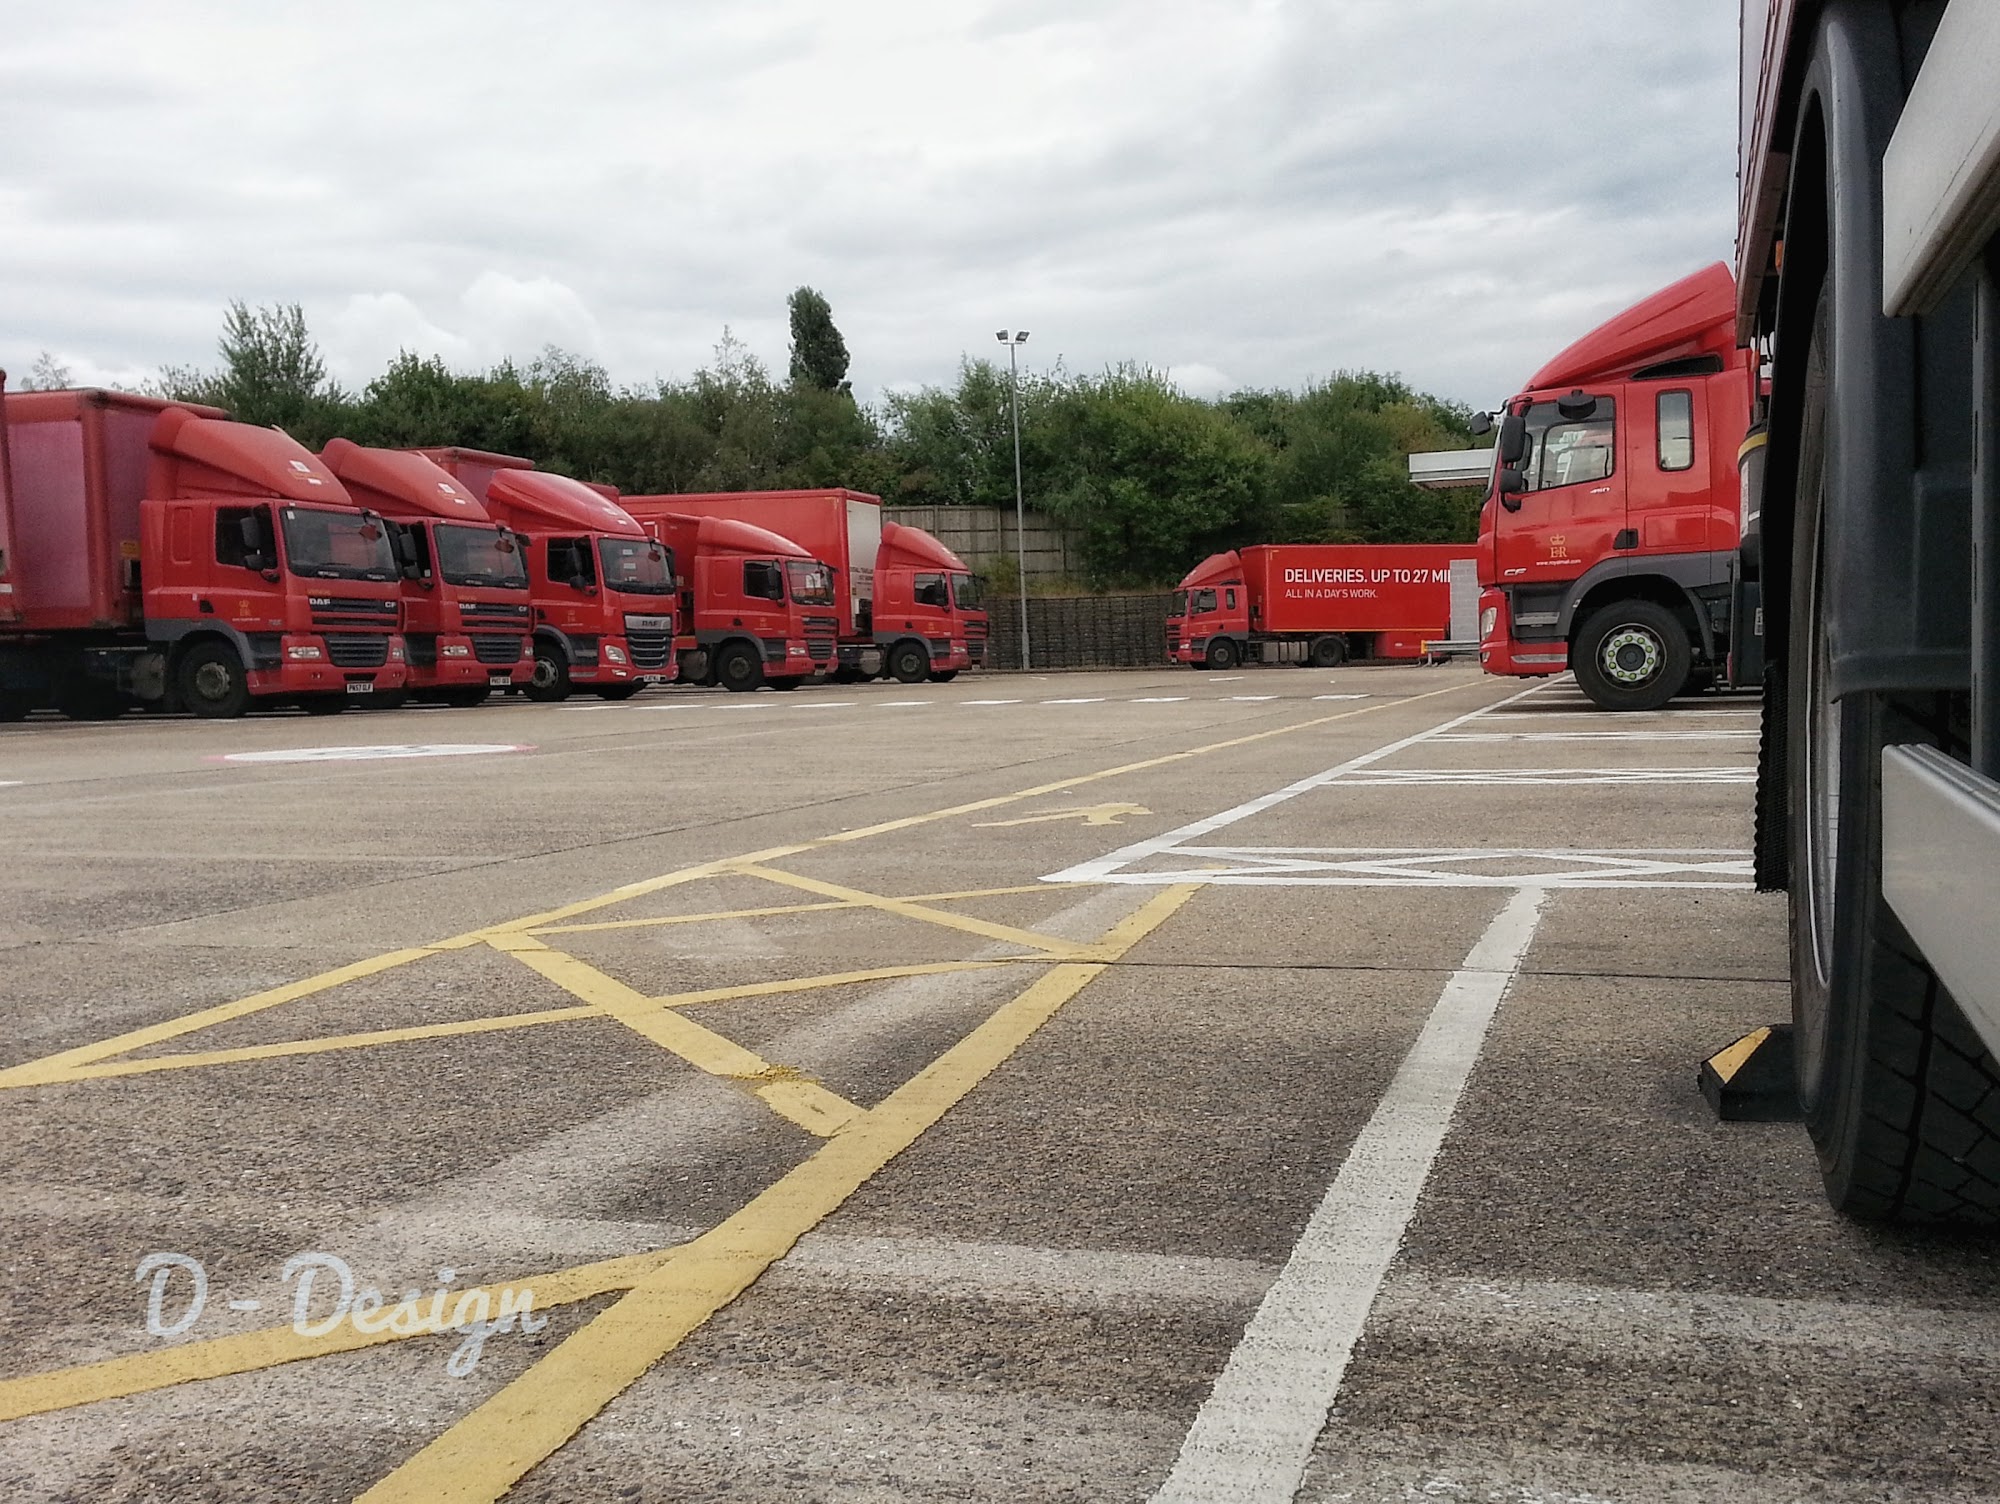 Royal Mail - Greenford Mail Centre